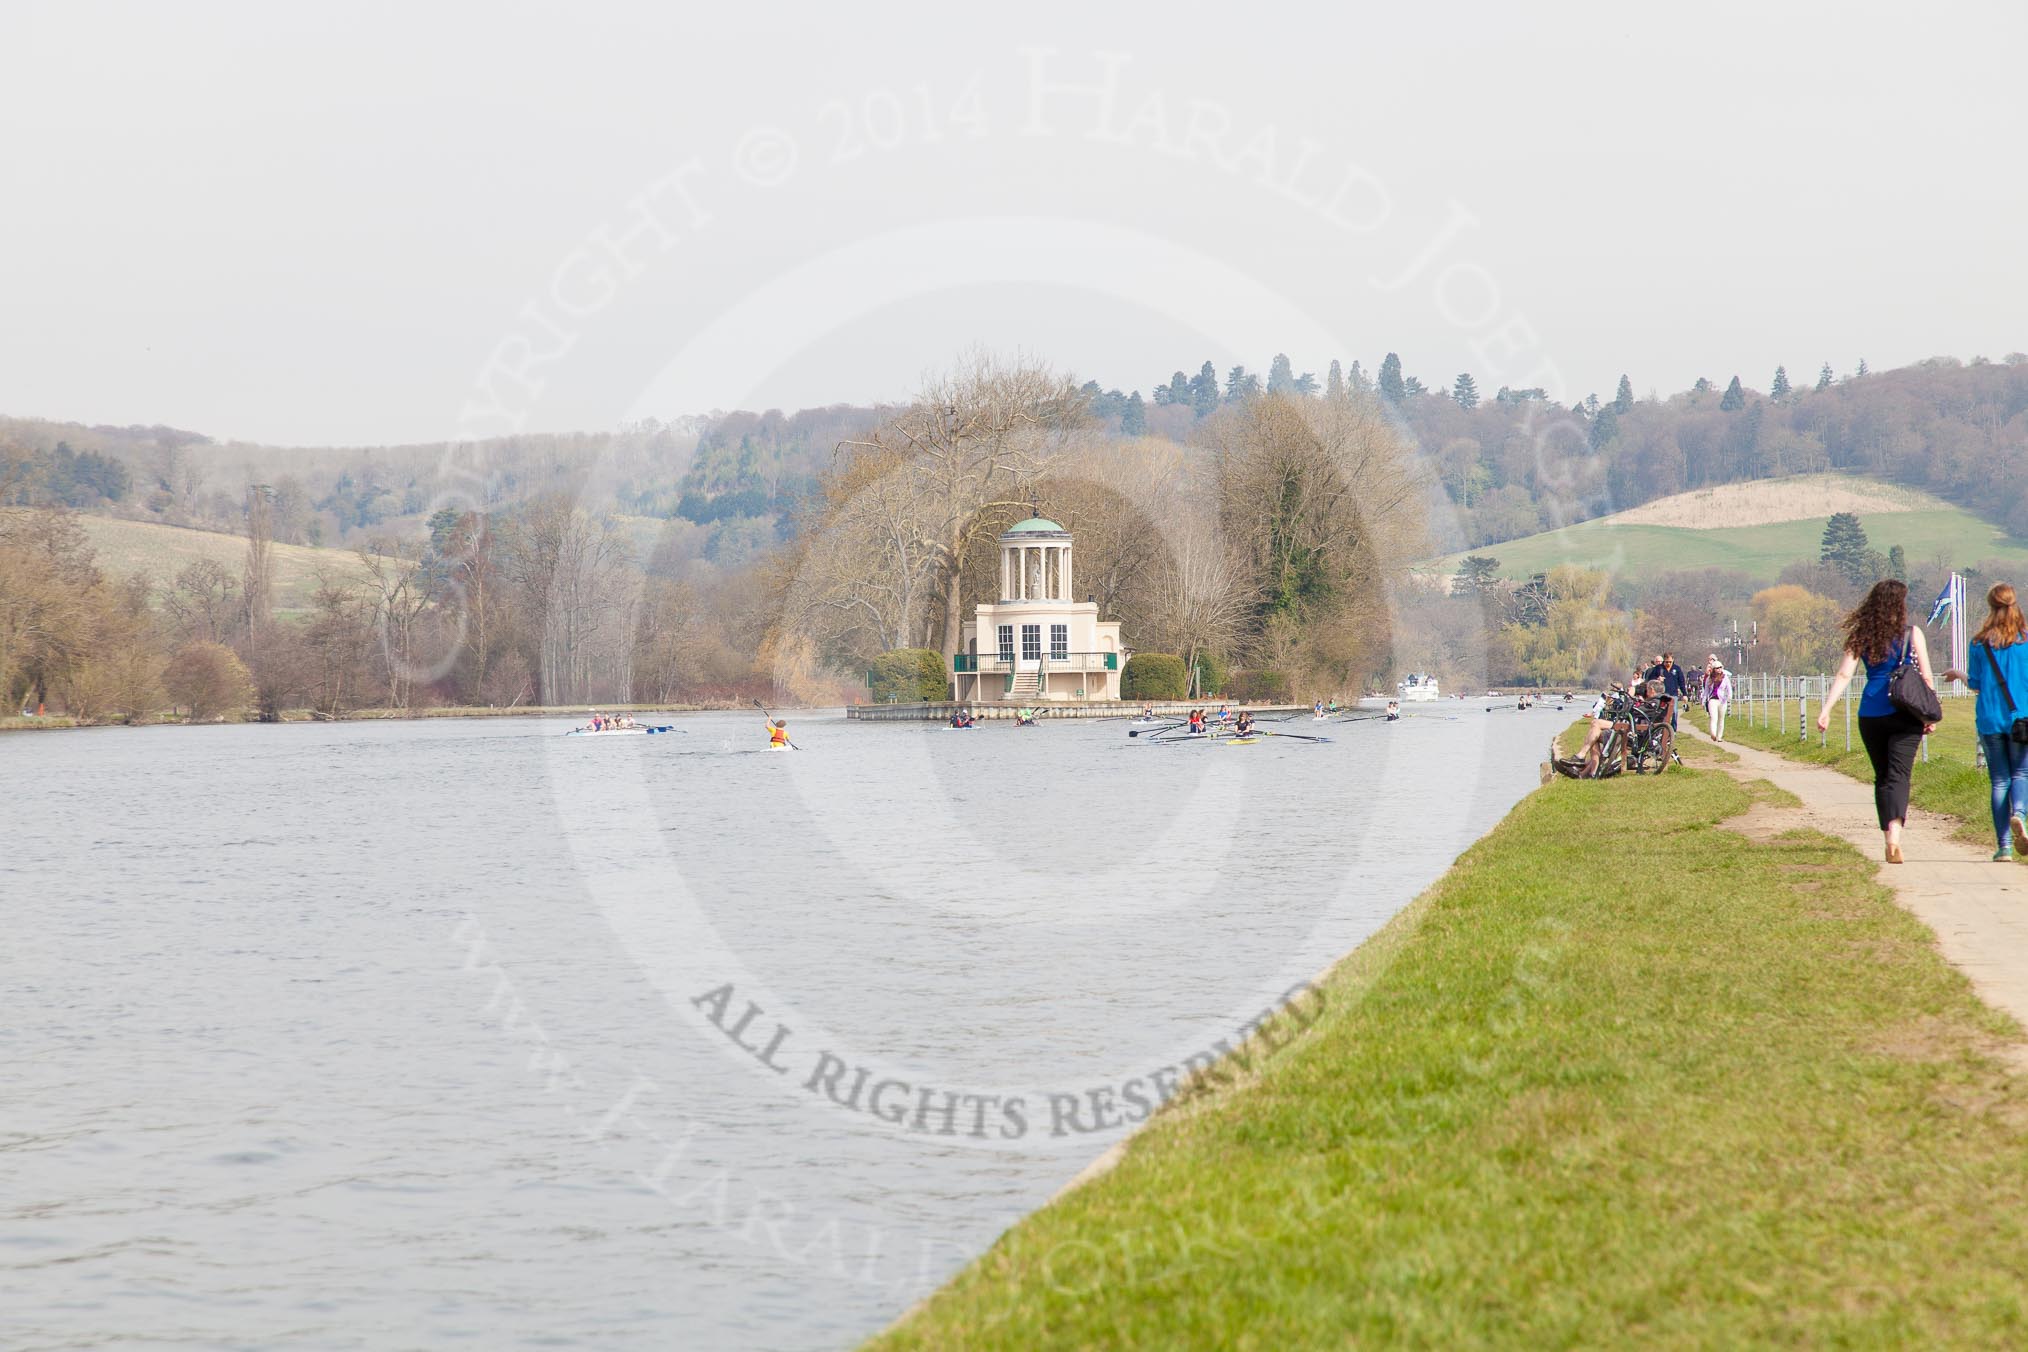 The Women's Boat Race and Henley Boat Races 2014: The finish of the Henley Boat Races at Temple Island..
River Thames,
Henley-on-Thames,
Buckinghamshire,
United Kingdom,
on 30 March 2014 at 11:43, image #2